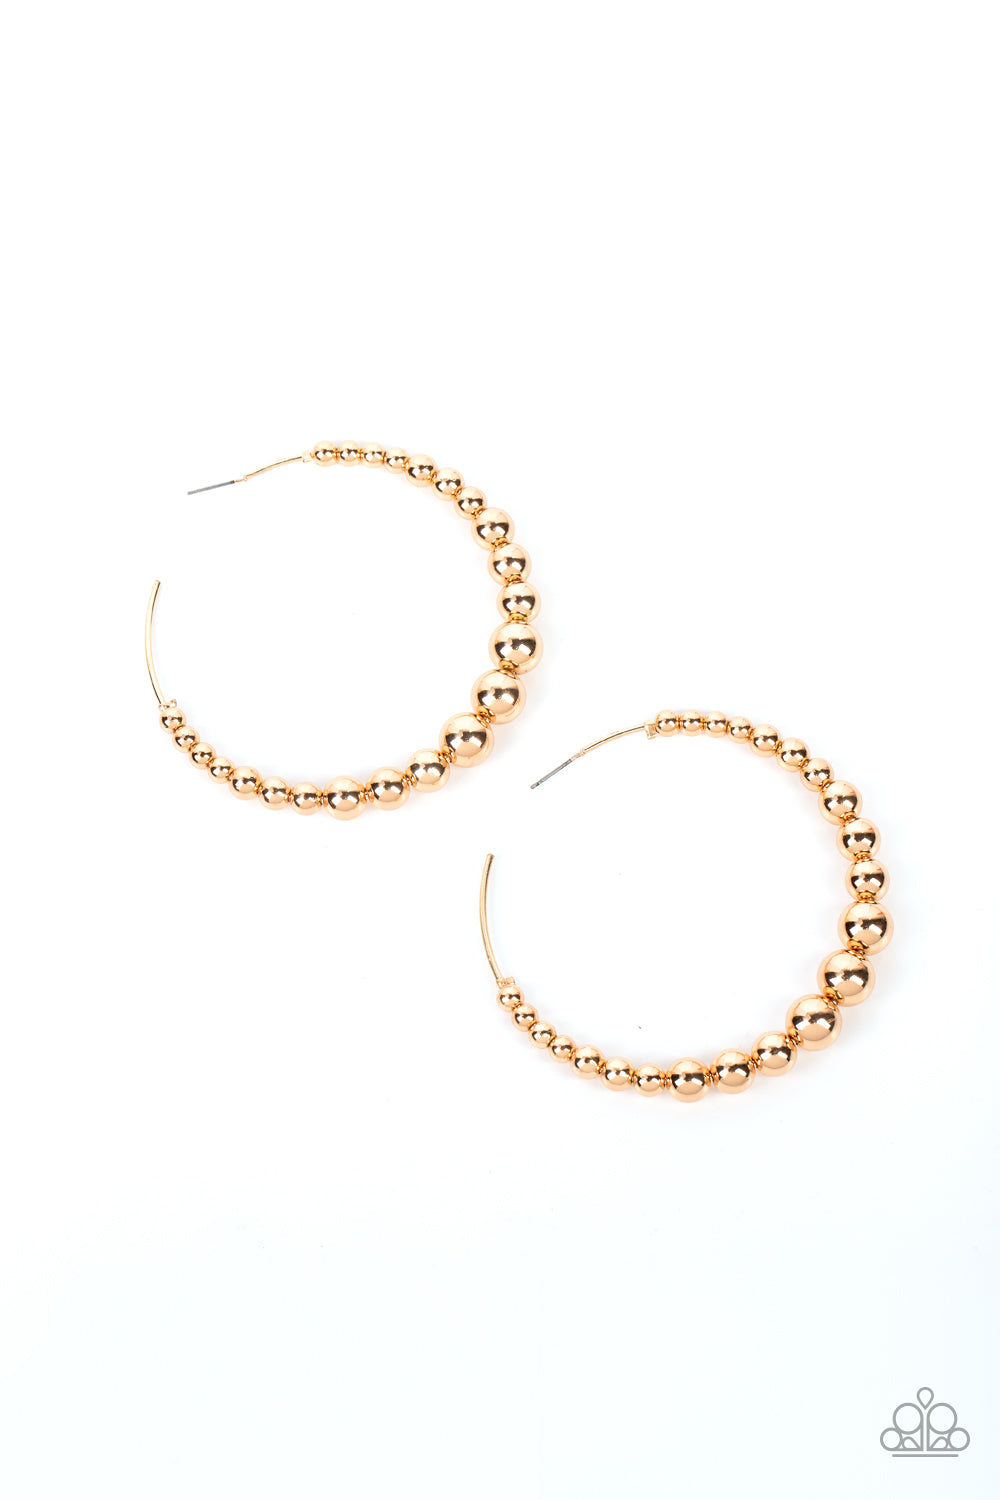 Show Off Your Curves - Gold Earrings - Paparazzi Accessories